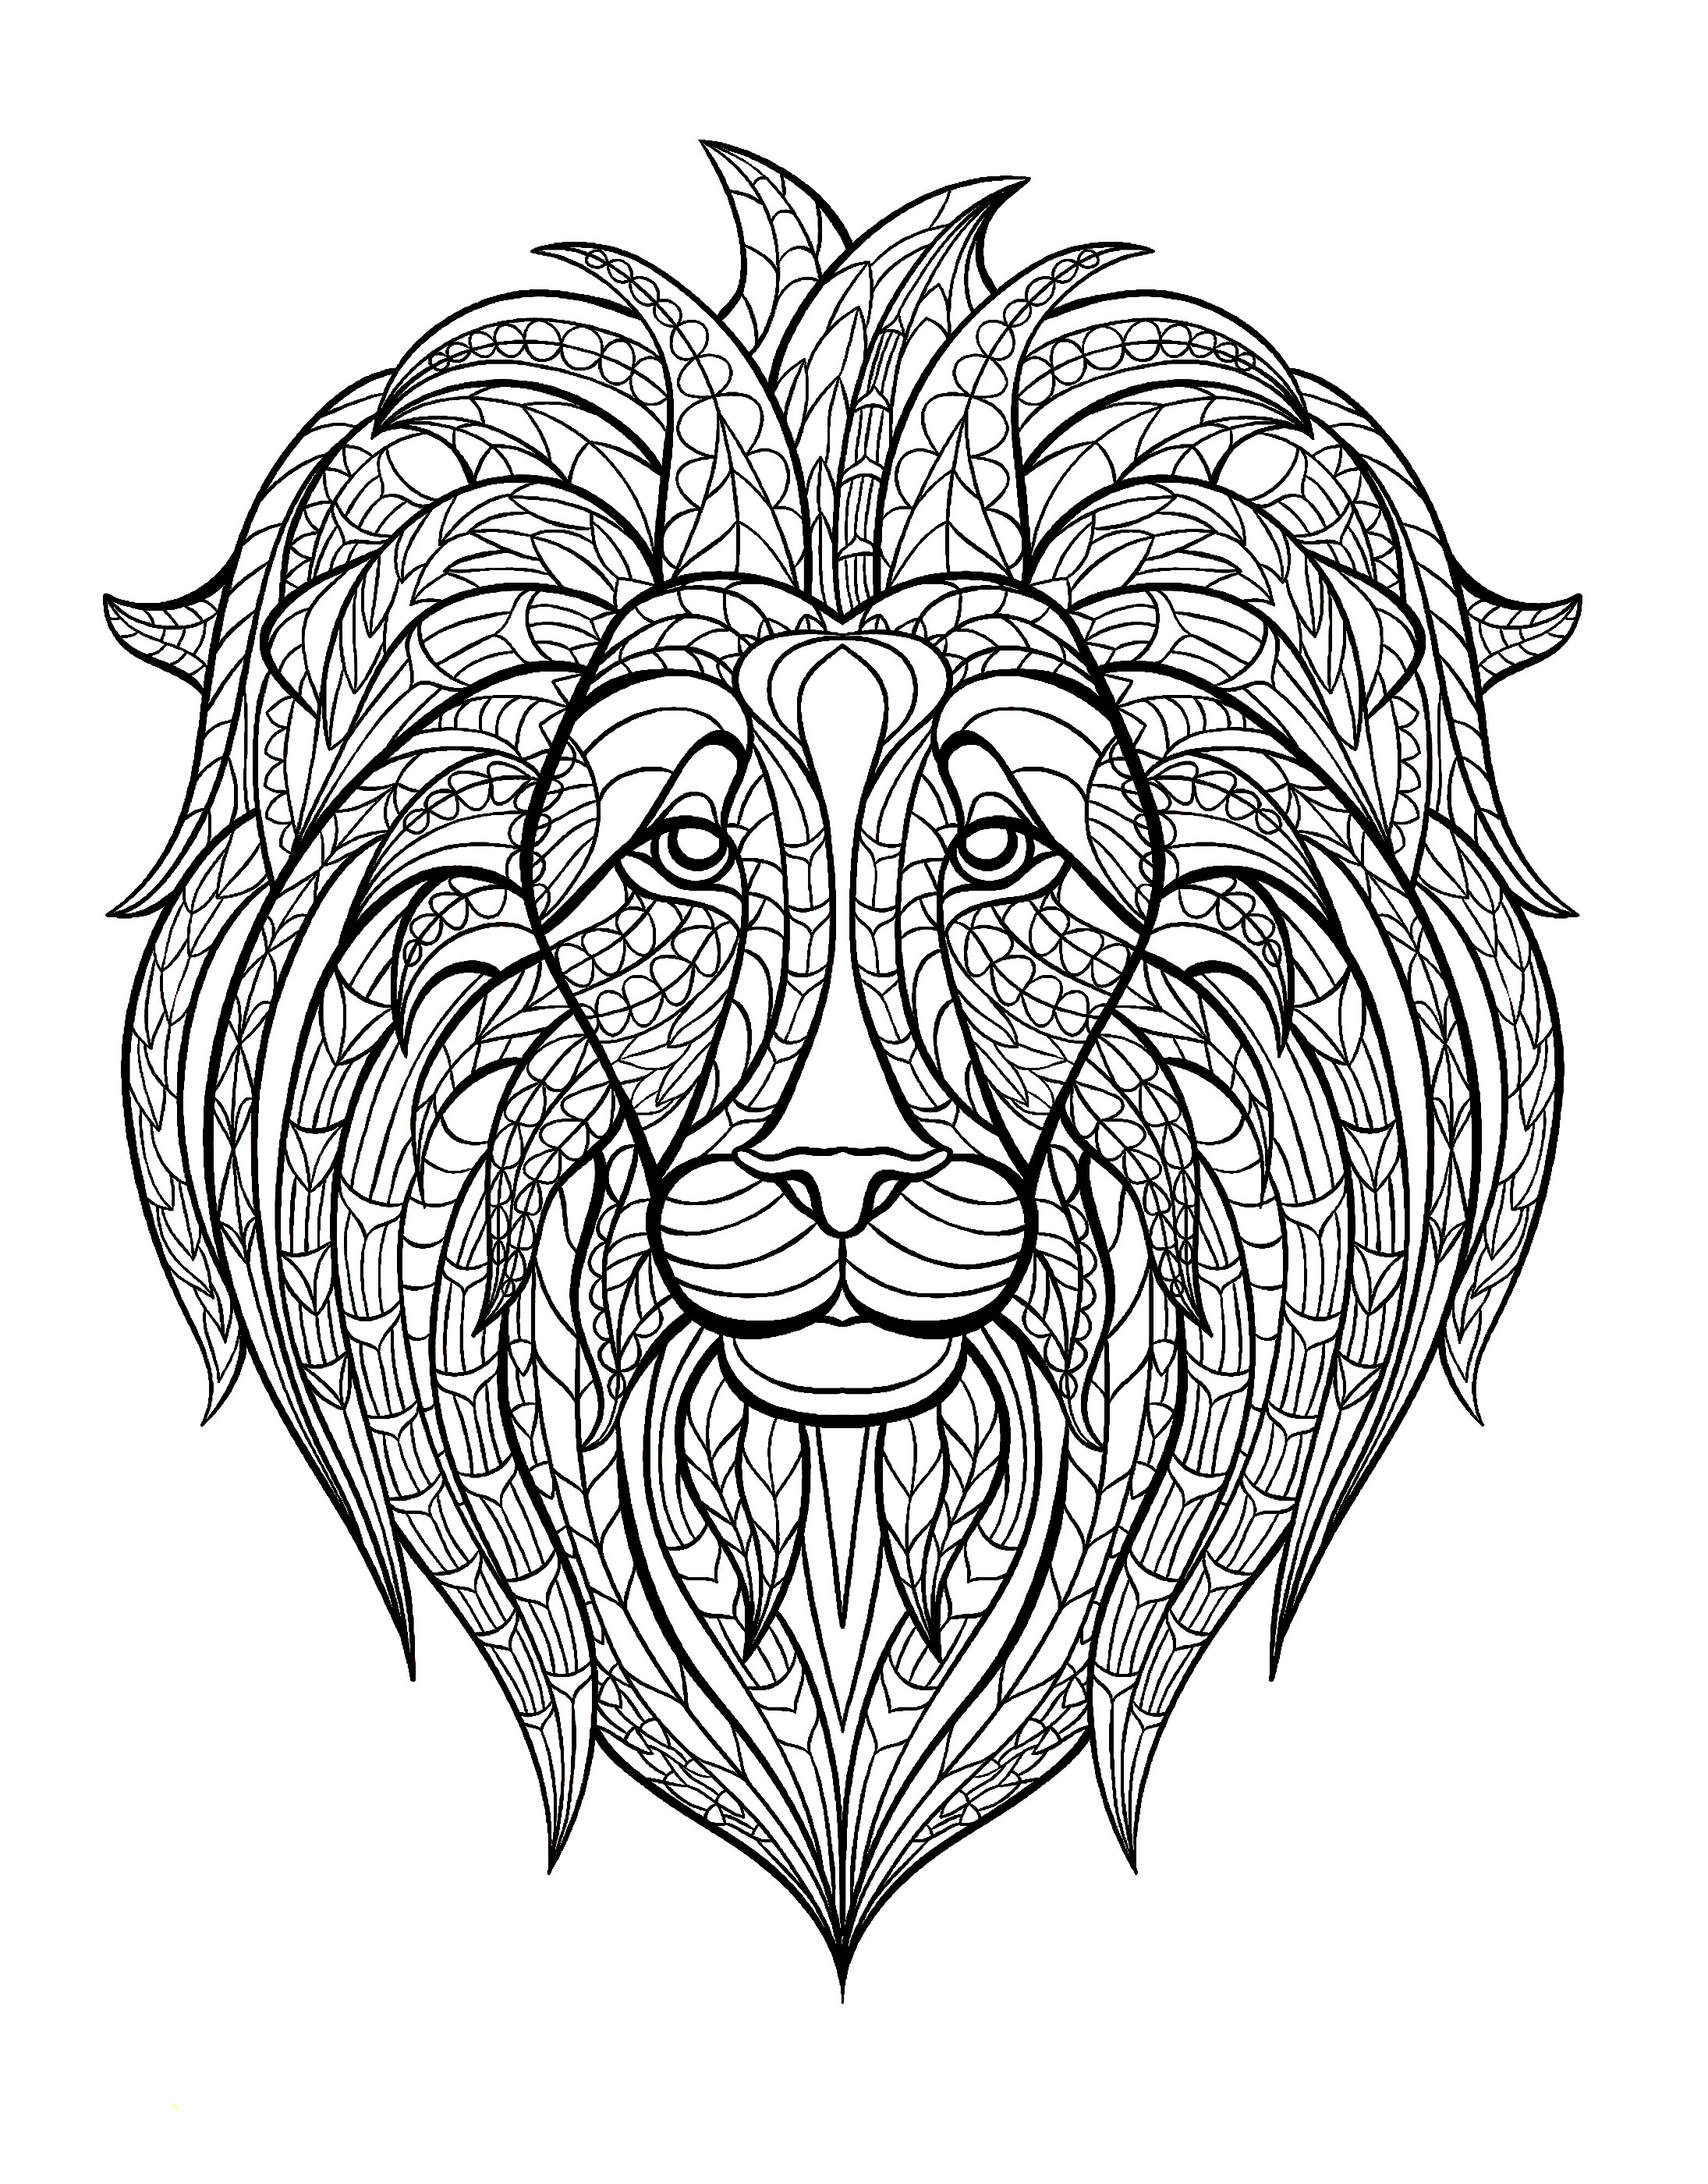 791 Cartoon Africa Coloring Pages for Kids